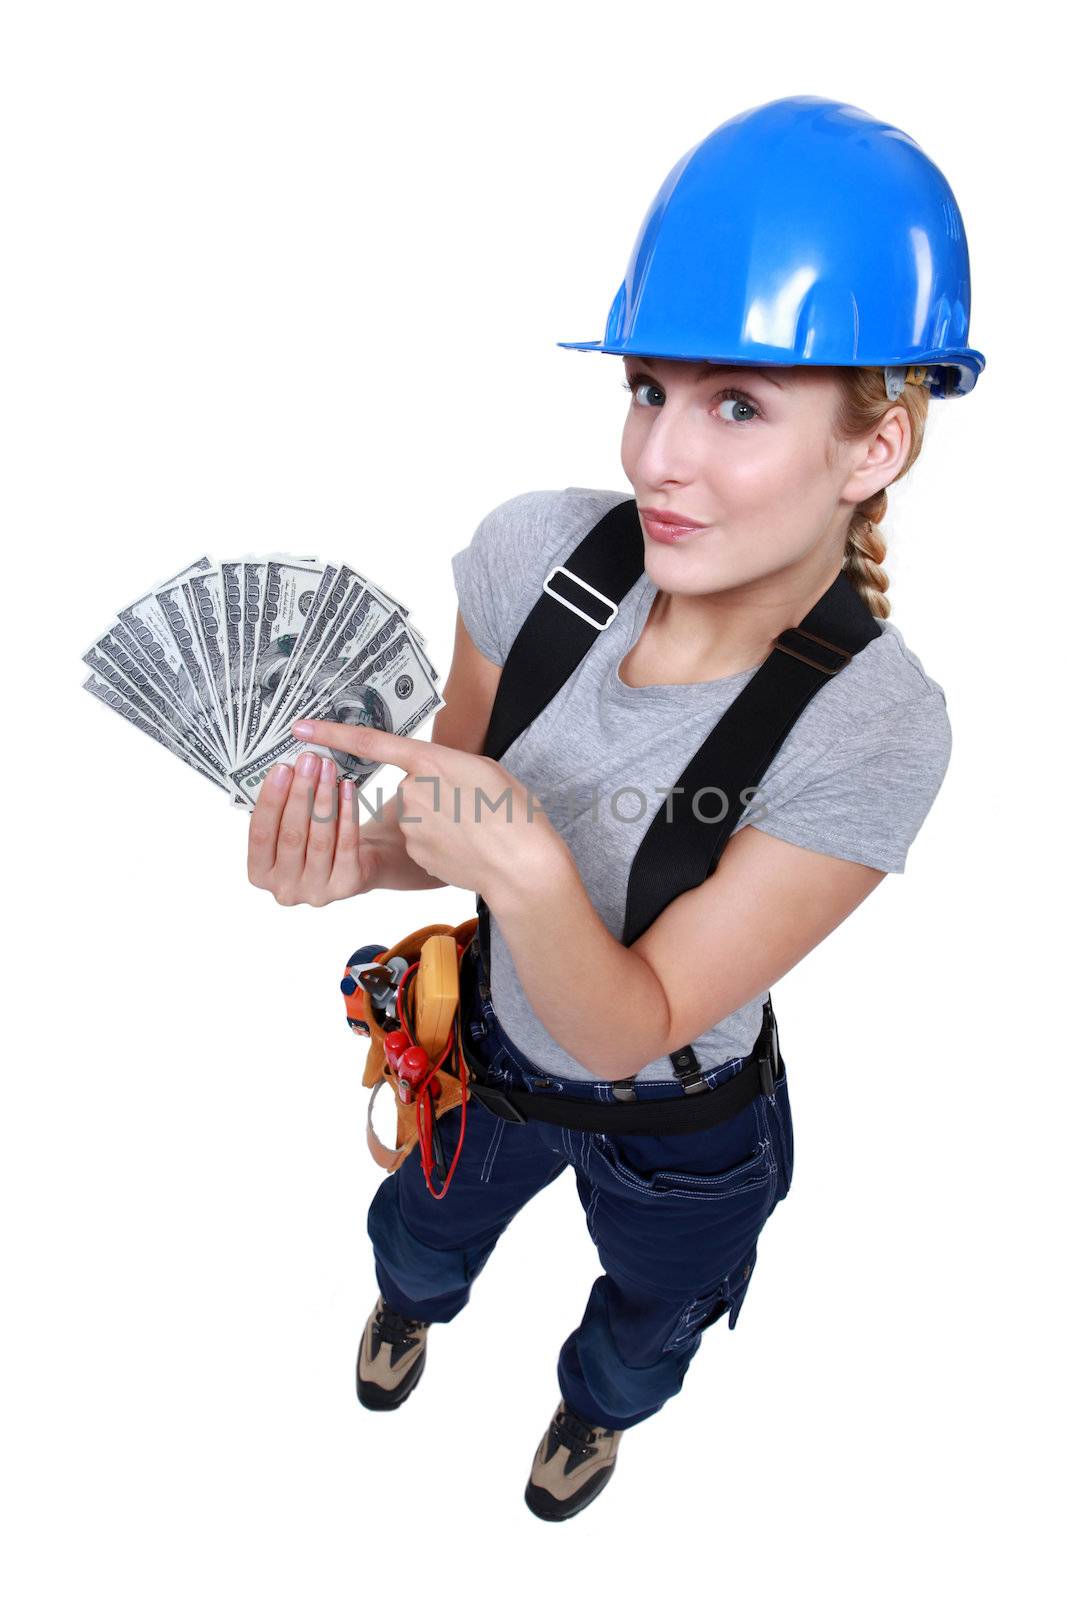 Electrician holding pay packet by phovoir